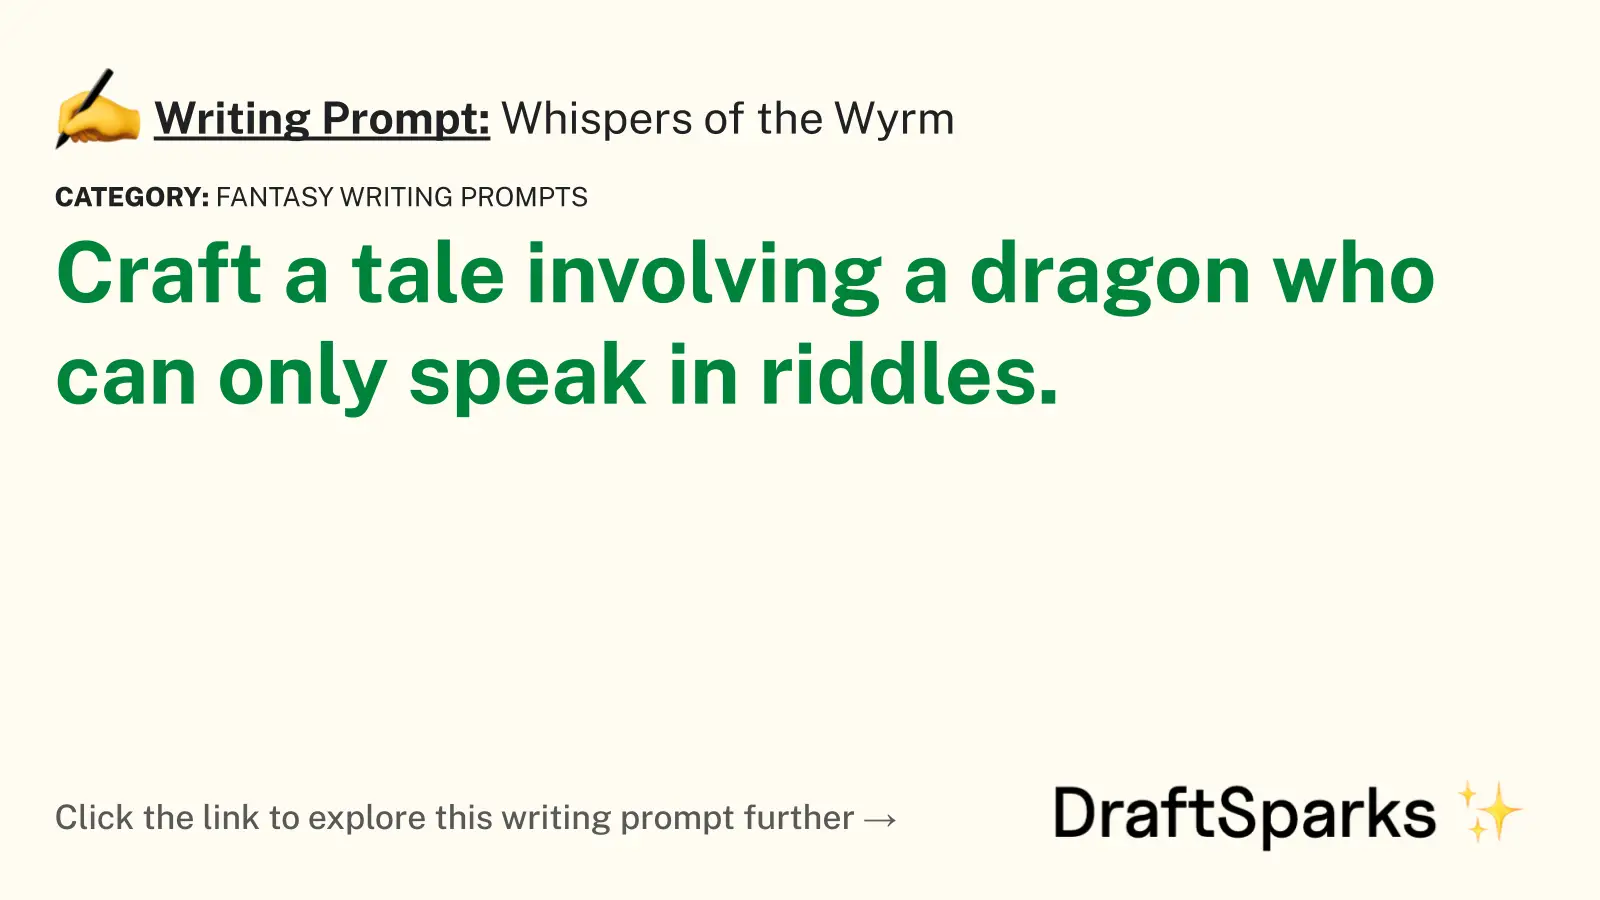 Whispers of the Wyrm